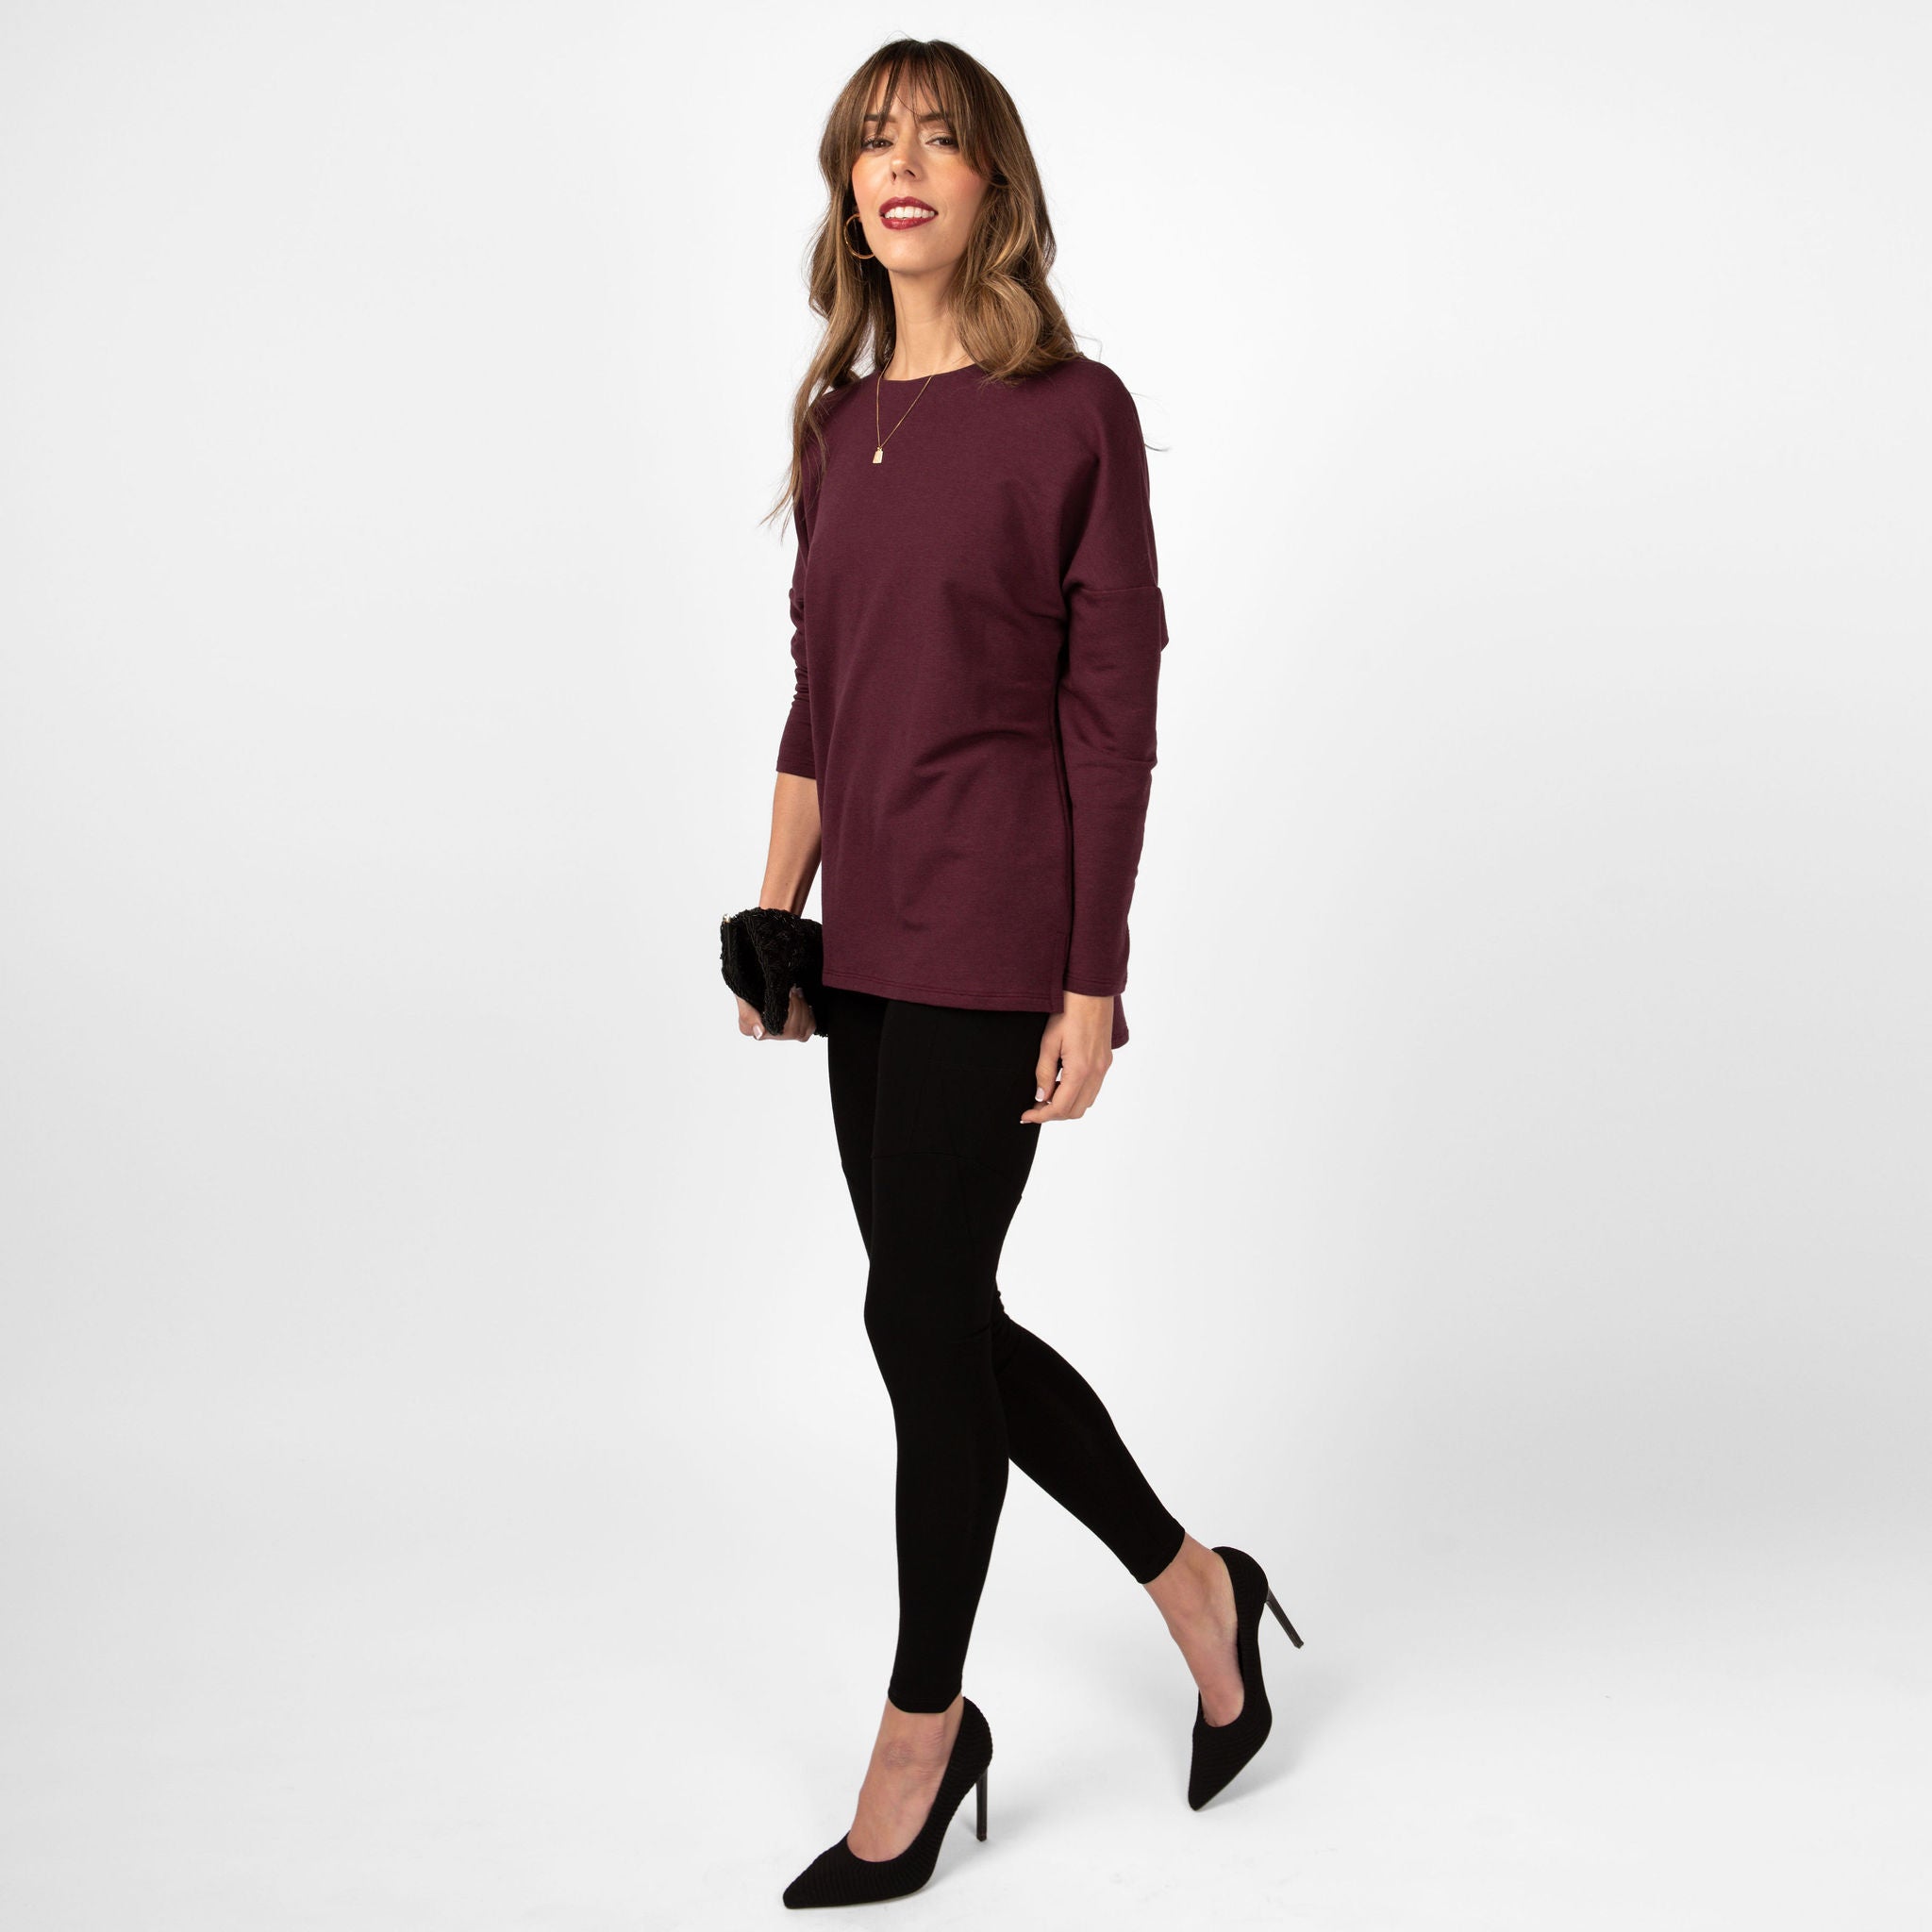 Woman wearing black form fitting stretchy leggings with a maroon long sleeve sweatshirt